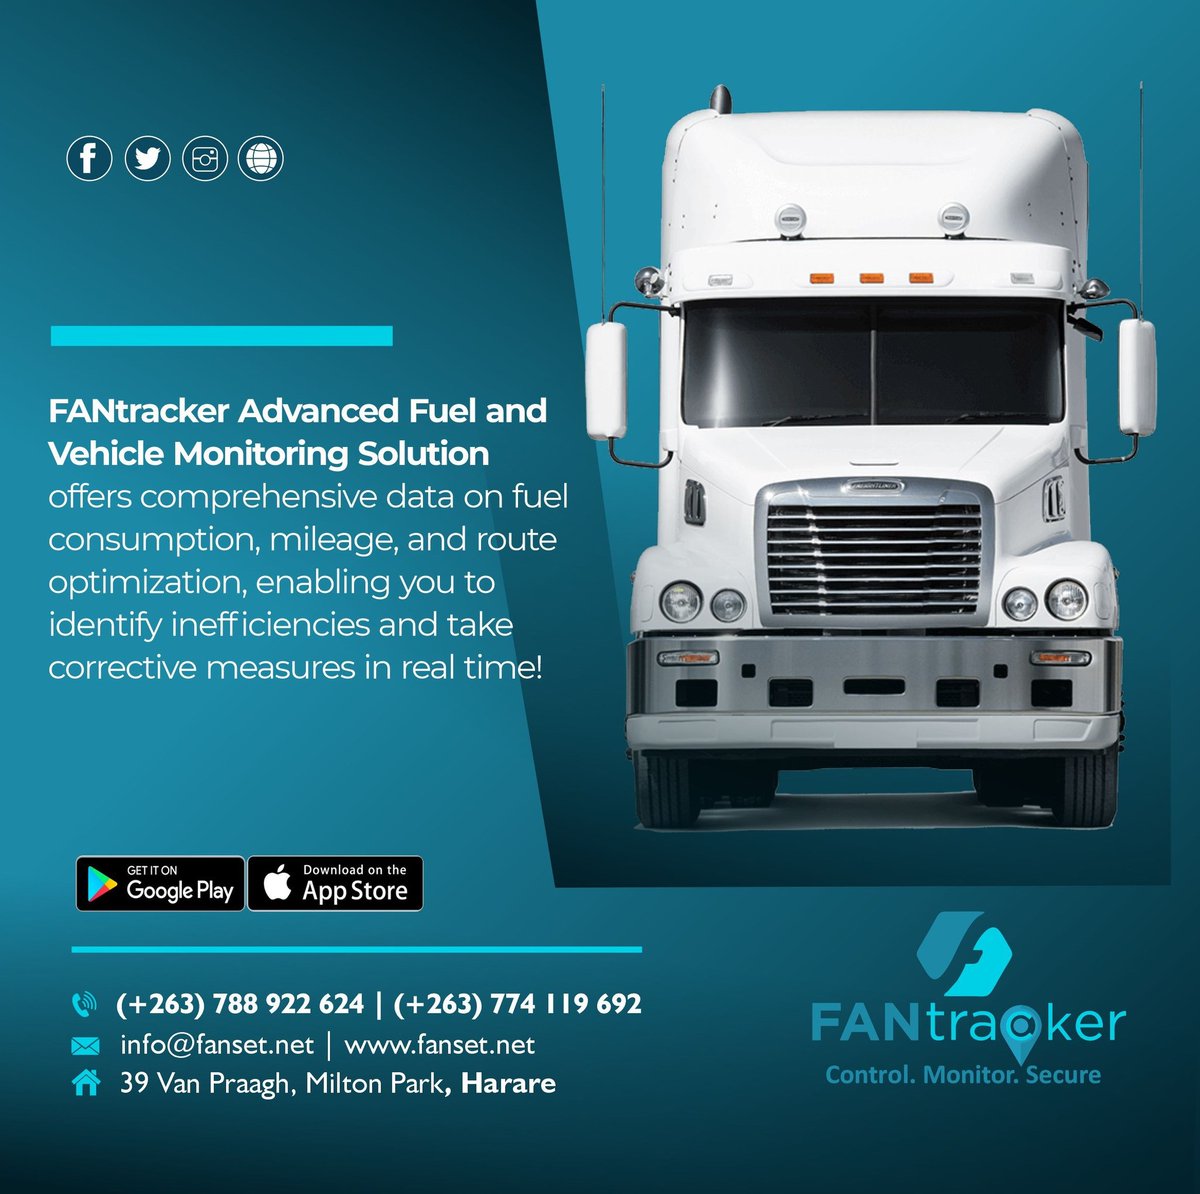 Real-time Vehicle Tracking is essential in ensuring the safety of your drivers and your fleet, especially during breakdowns or other emergencies. Secure your fleet.
Sign up for the FANtracker Advanced Fuel Monitoring Solution today!
Contact: +263778179409/ 0774119692

#FANtracker